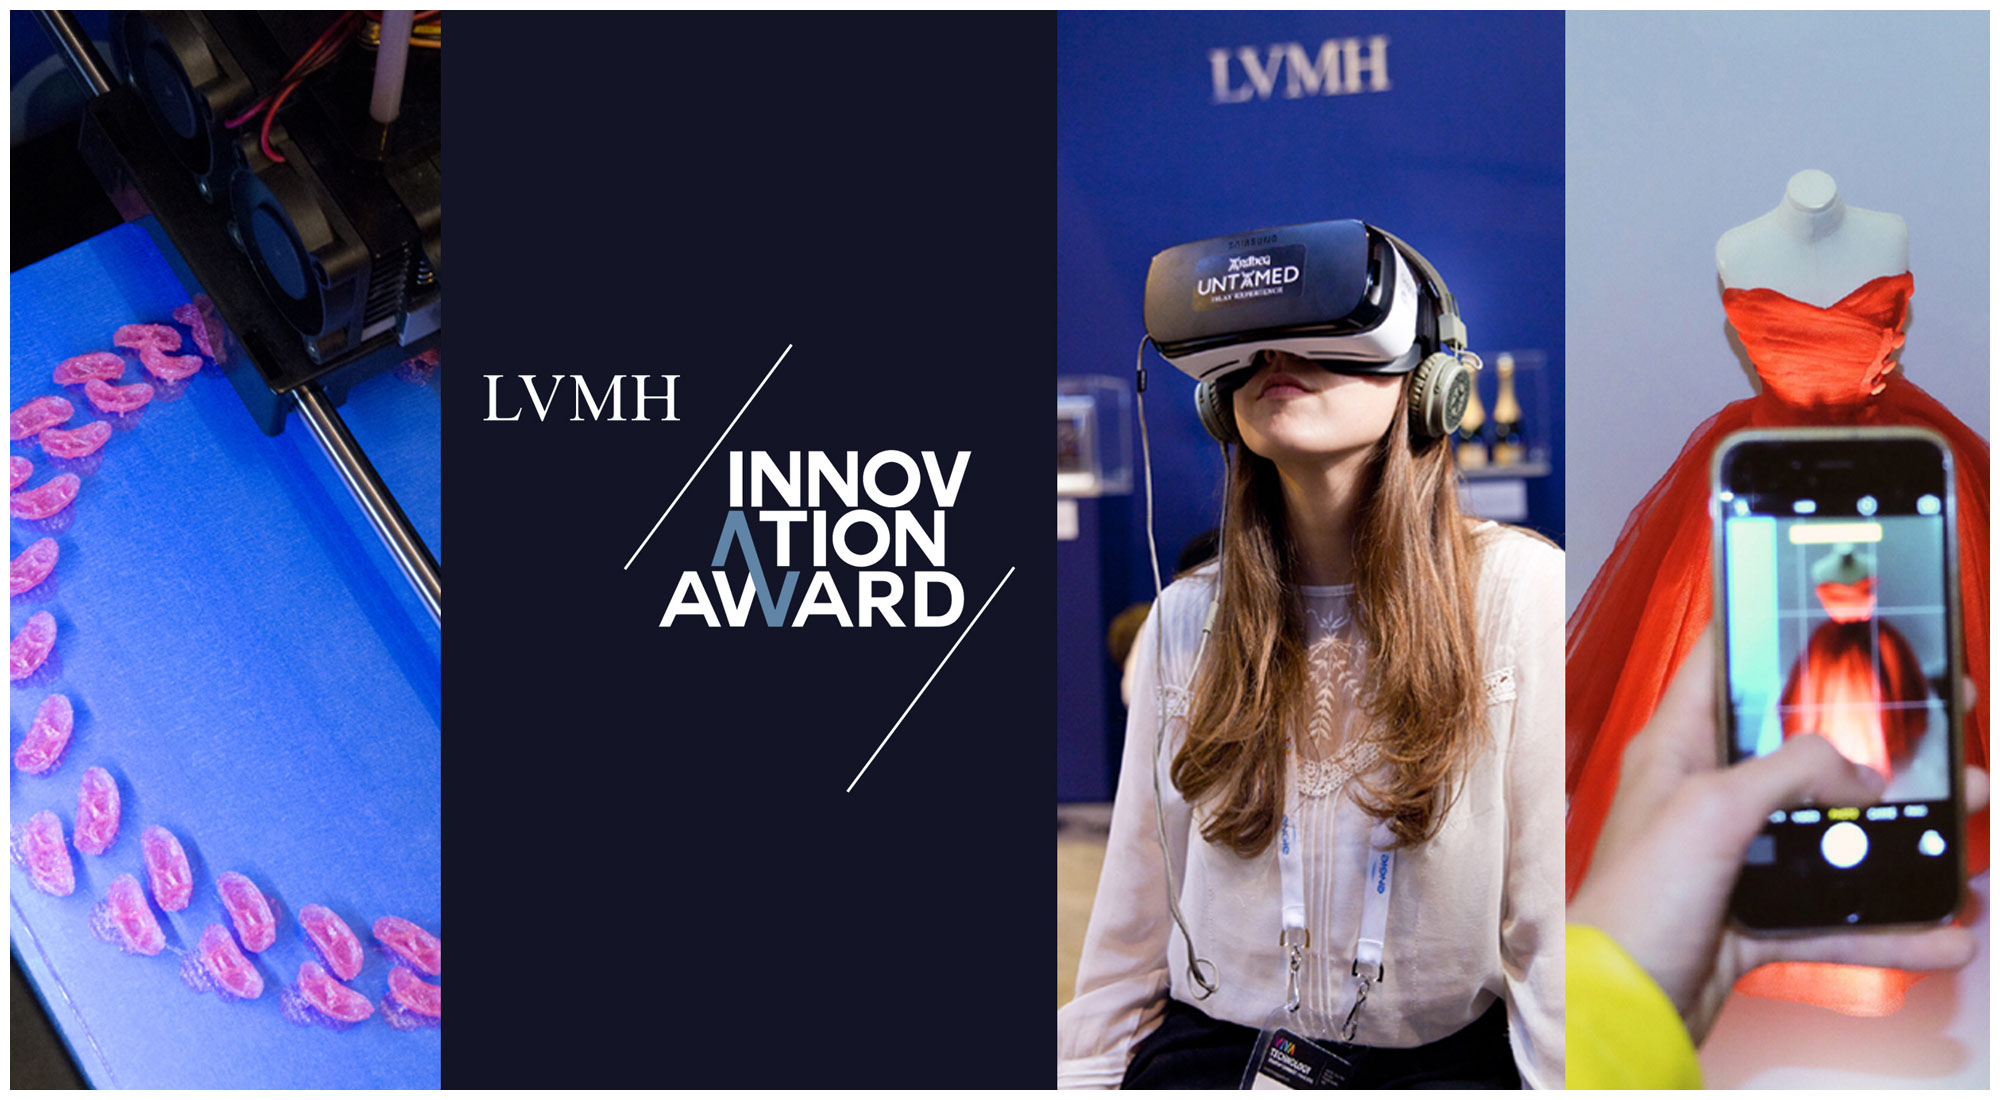 LVMH Innovation Award: discover the 30 finalist startups that will